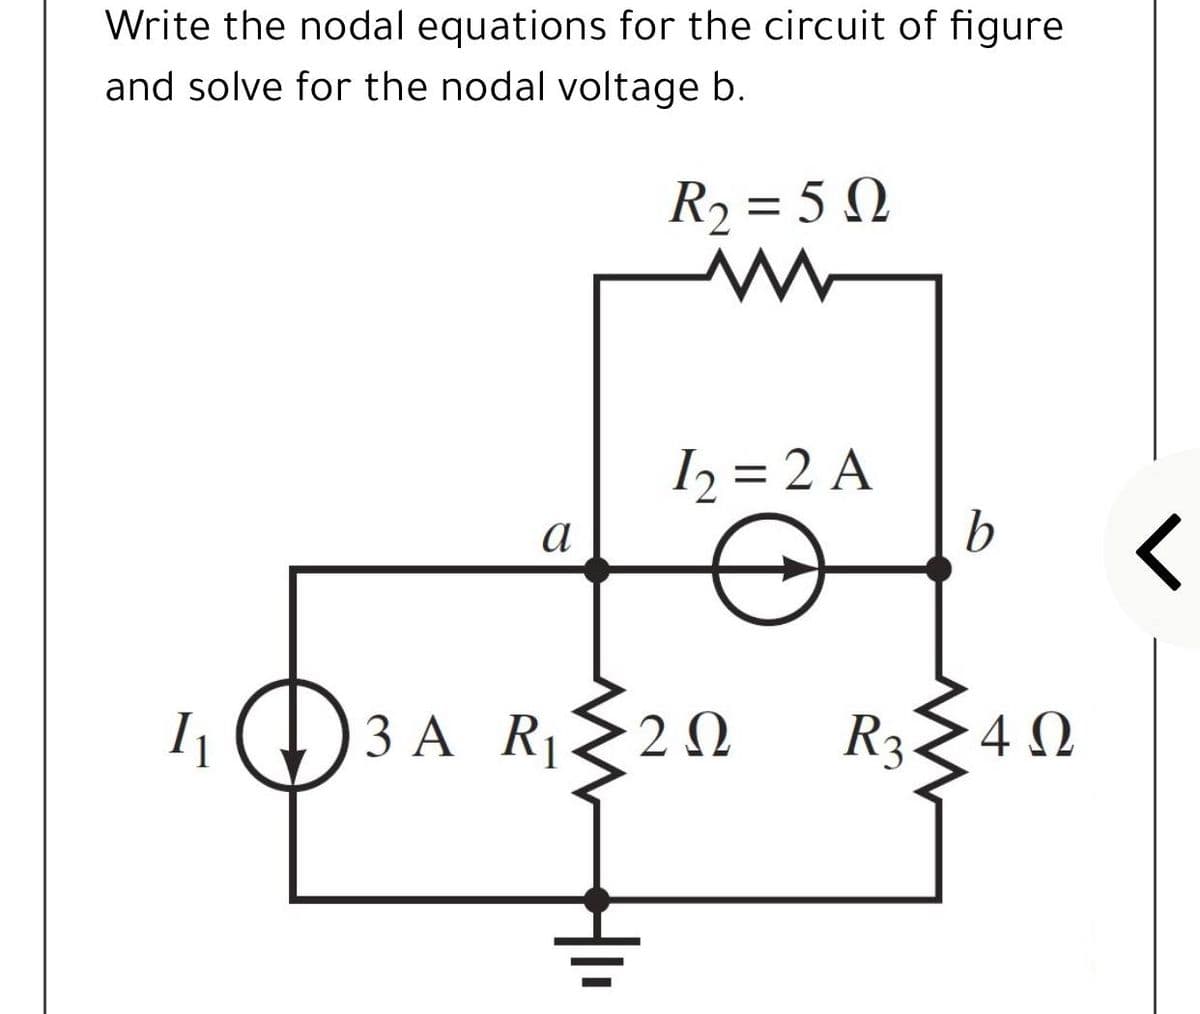 Write the nodal equations for the circuit of figure
and solve for the nodal voltage b.
R2 = 5 N
%3D
I2 = 2 A
a
1) 3 A RE 2 N
R3<4 N
